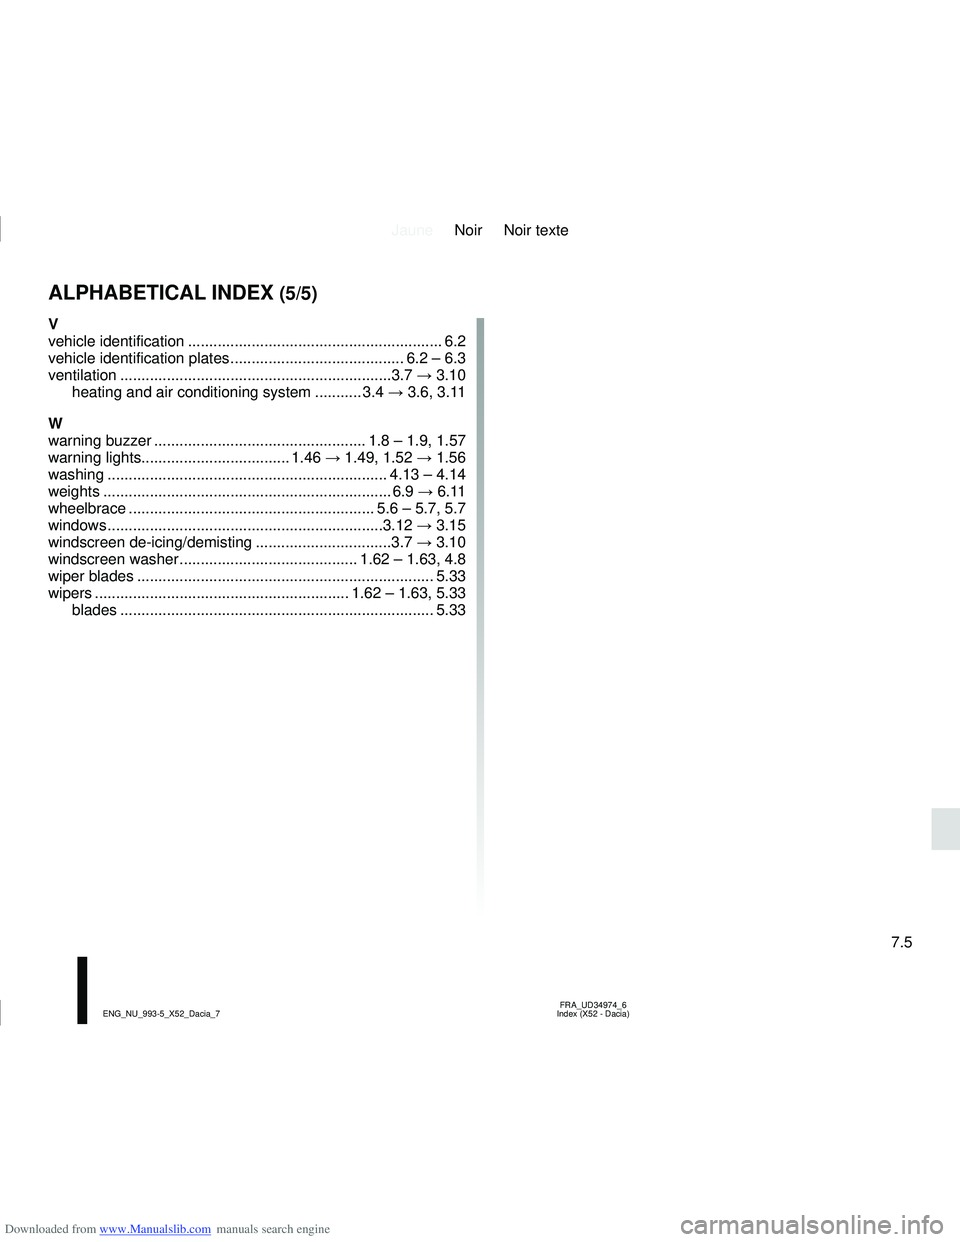 DACIA SANDERO 2019  Owners Manual Downloaded from www.Manualslib.com manuals search engine JauneNoir Noir texte
7.5
FRA_UD34974_6
Index (X52 - Dacia)
ENG_NU_993-5_X52_Dacia_7
ALPHABETICAL INDEX (5/5)
V
vehicle  identification ........